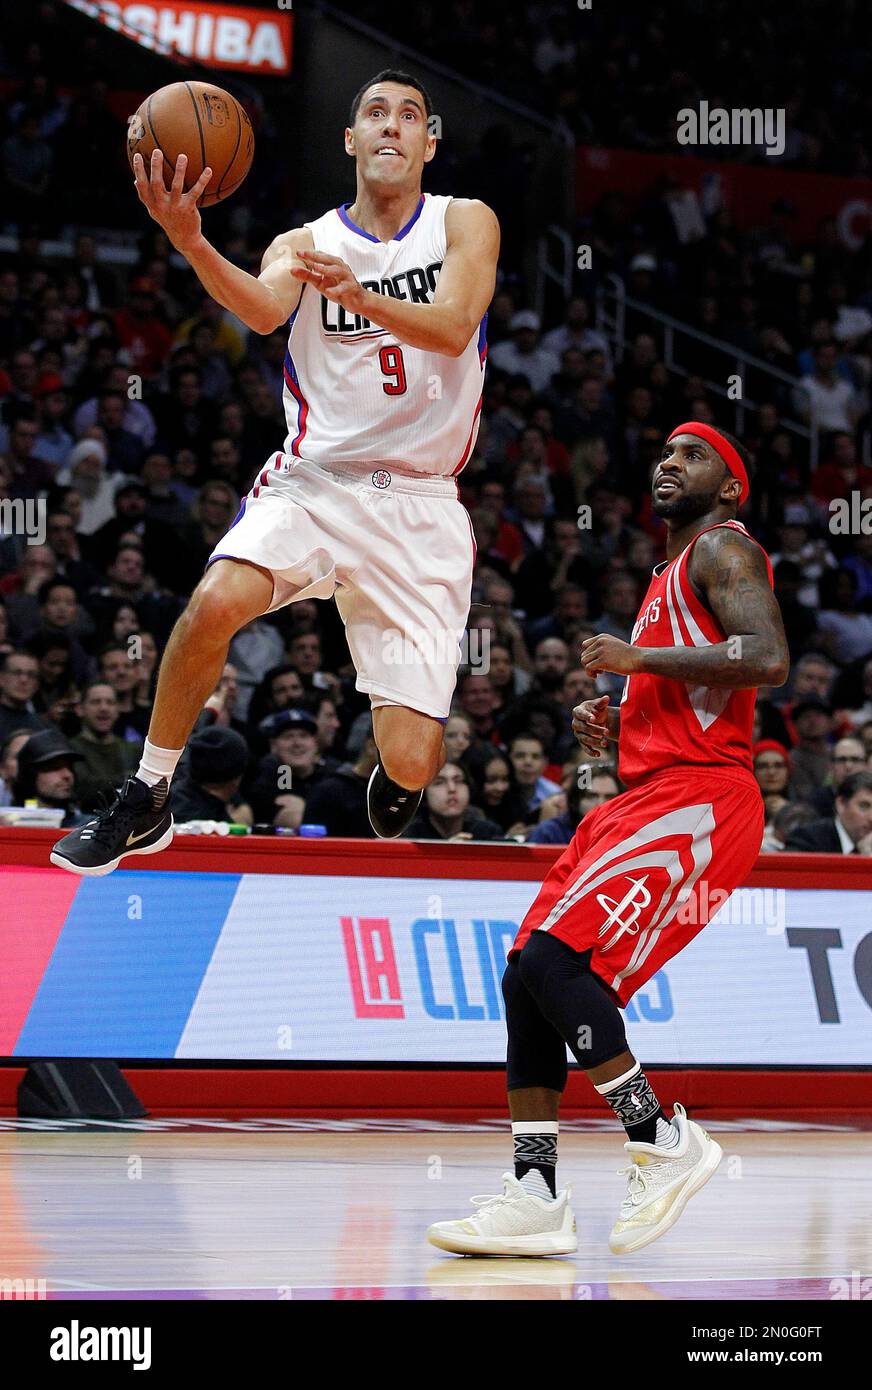 Clippers guard Pablo Prigioni will not play for Argentina at the